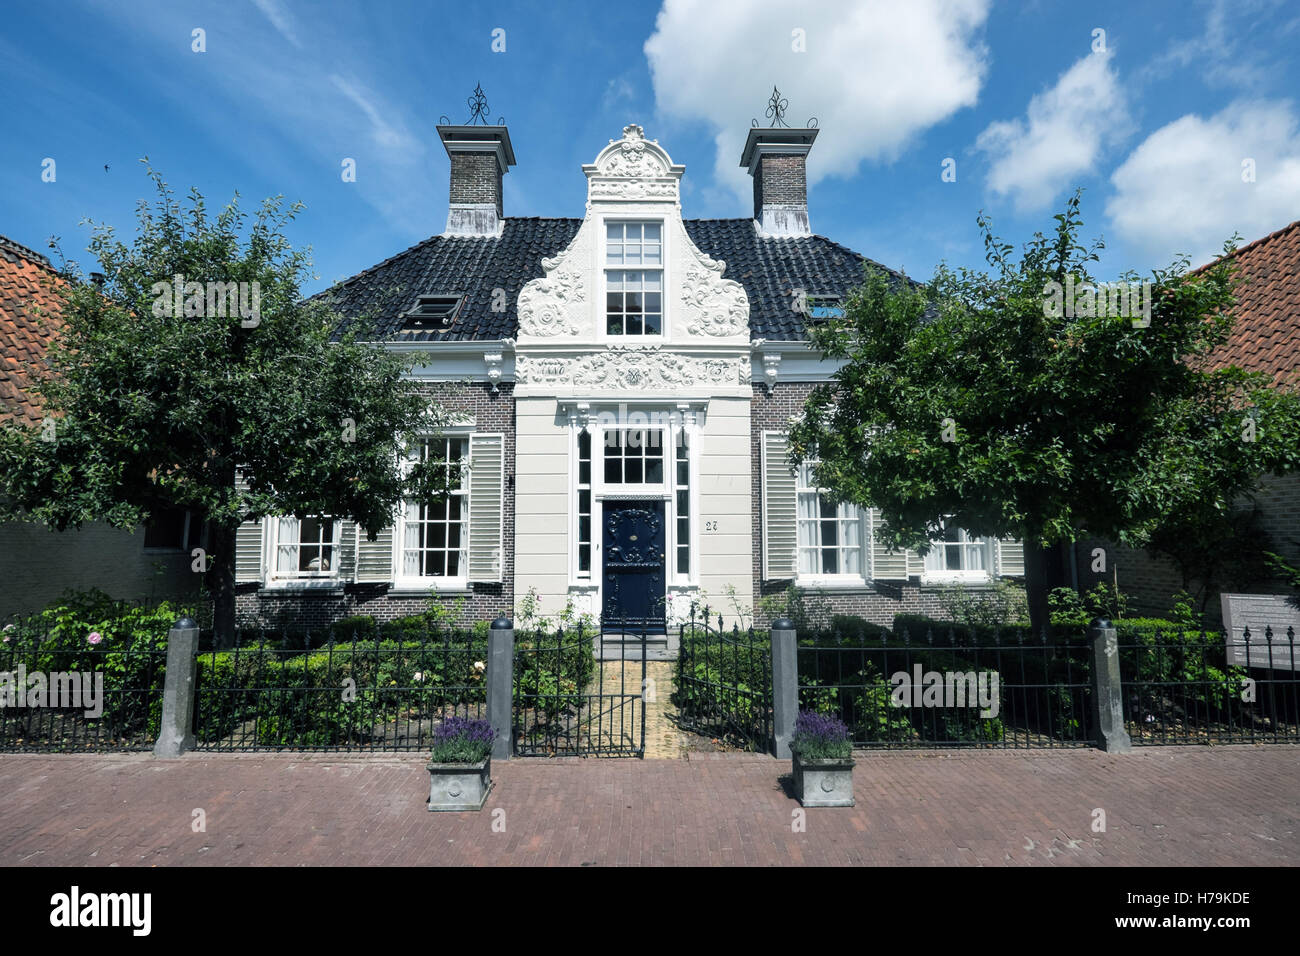 Frisian Mansion in the Netherlands Stock Photo